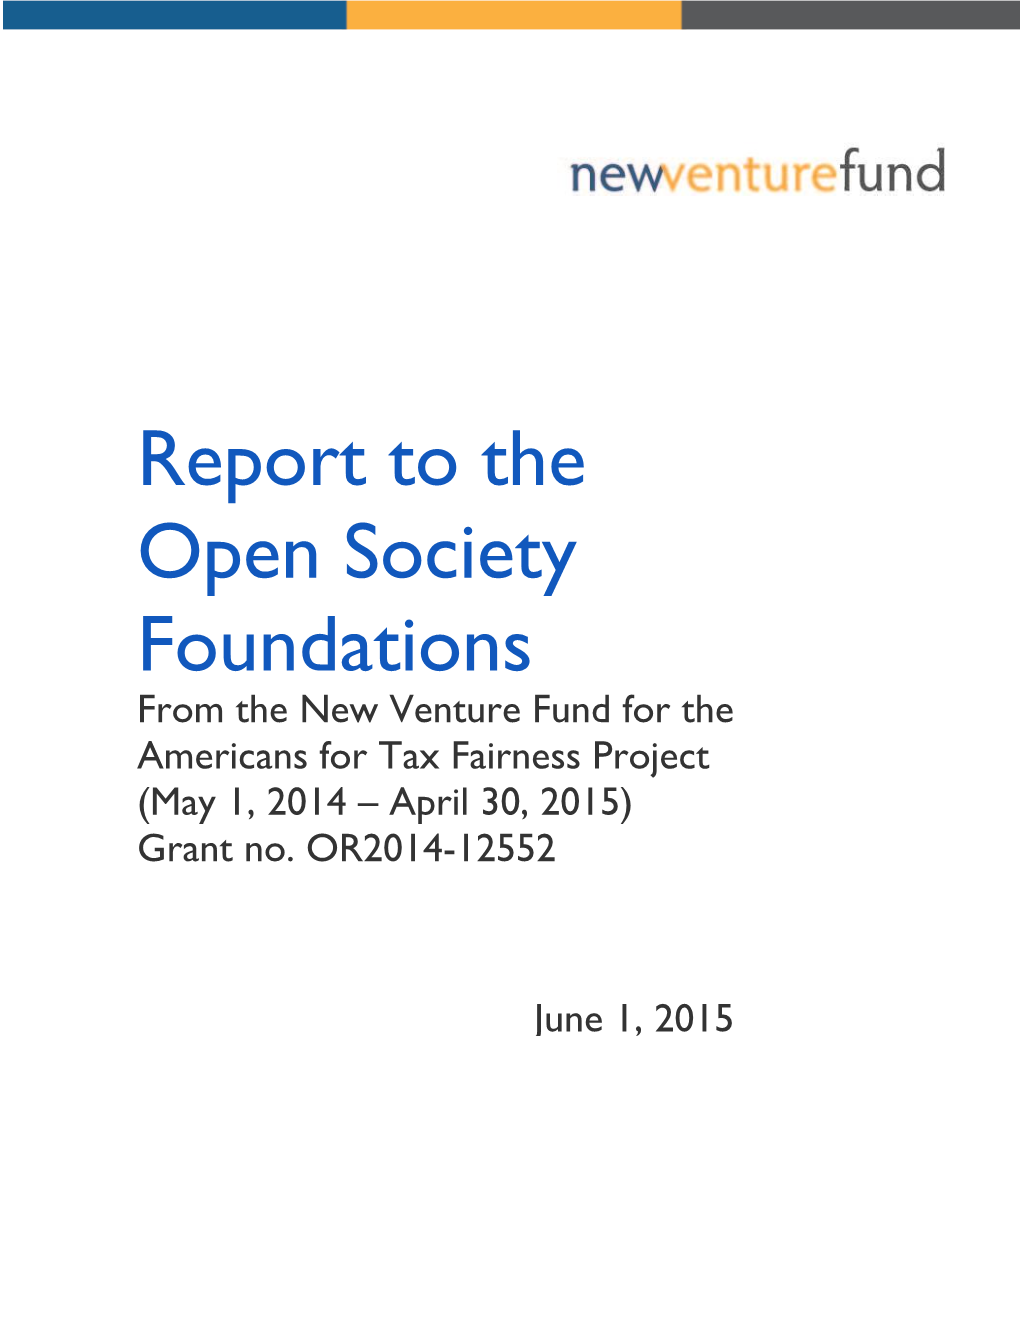 Report to the Open Society Foundations